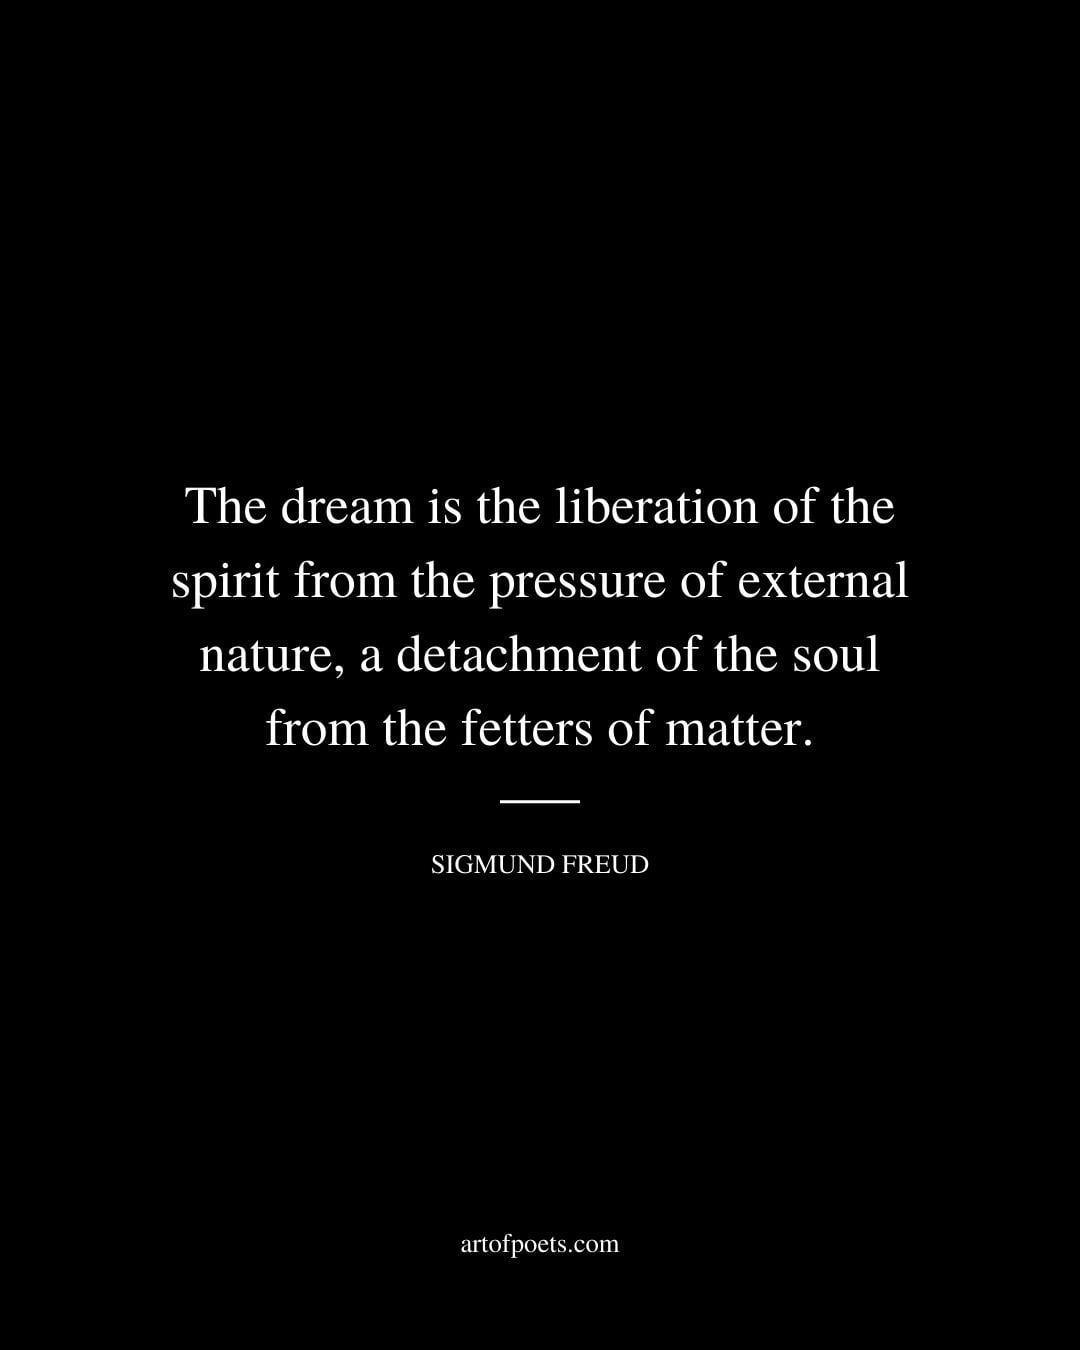 The dream is the liberation of the spirit from the pressure of external nature a detachment of the soul from the fetters of matter